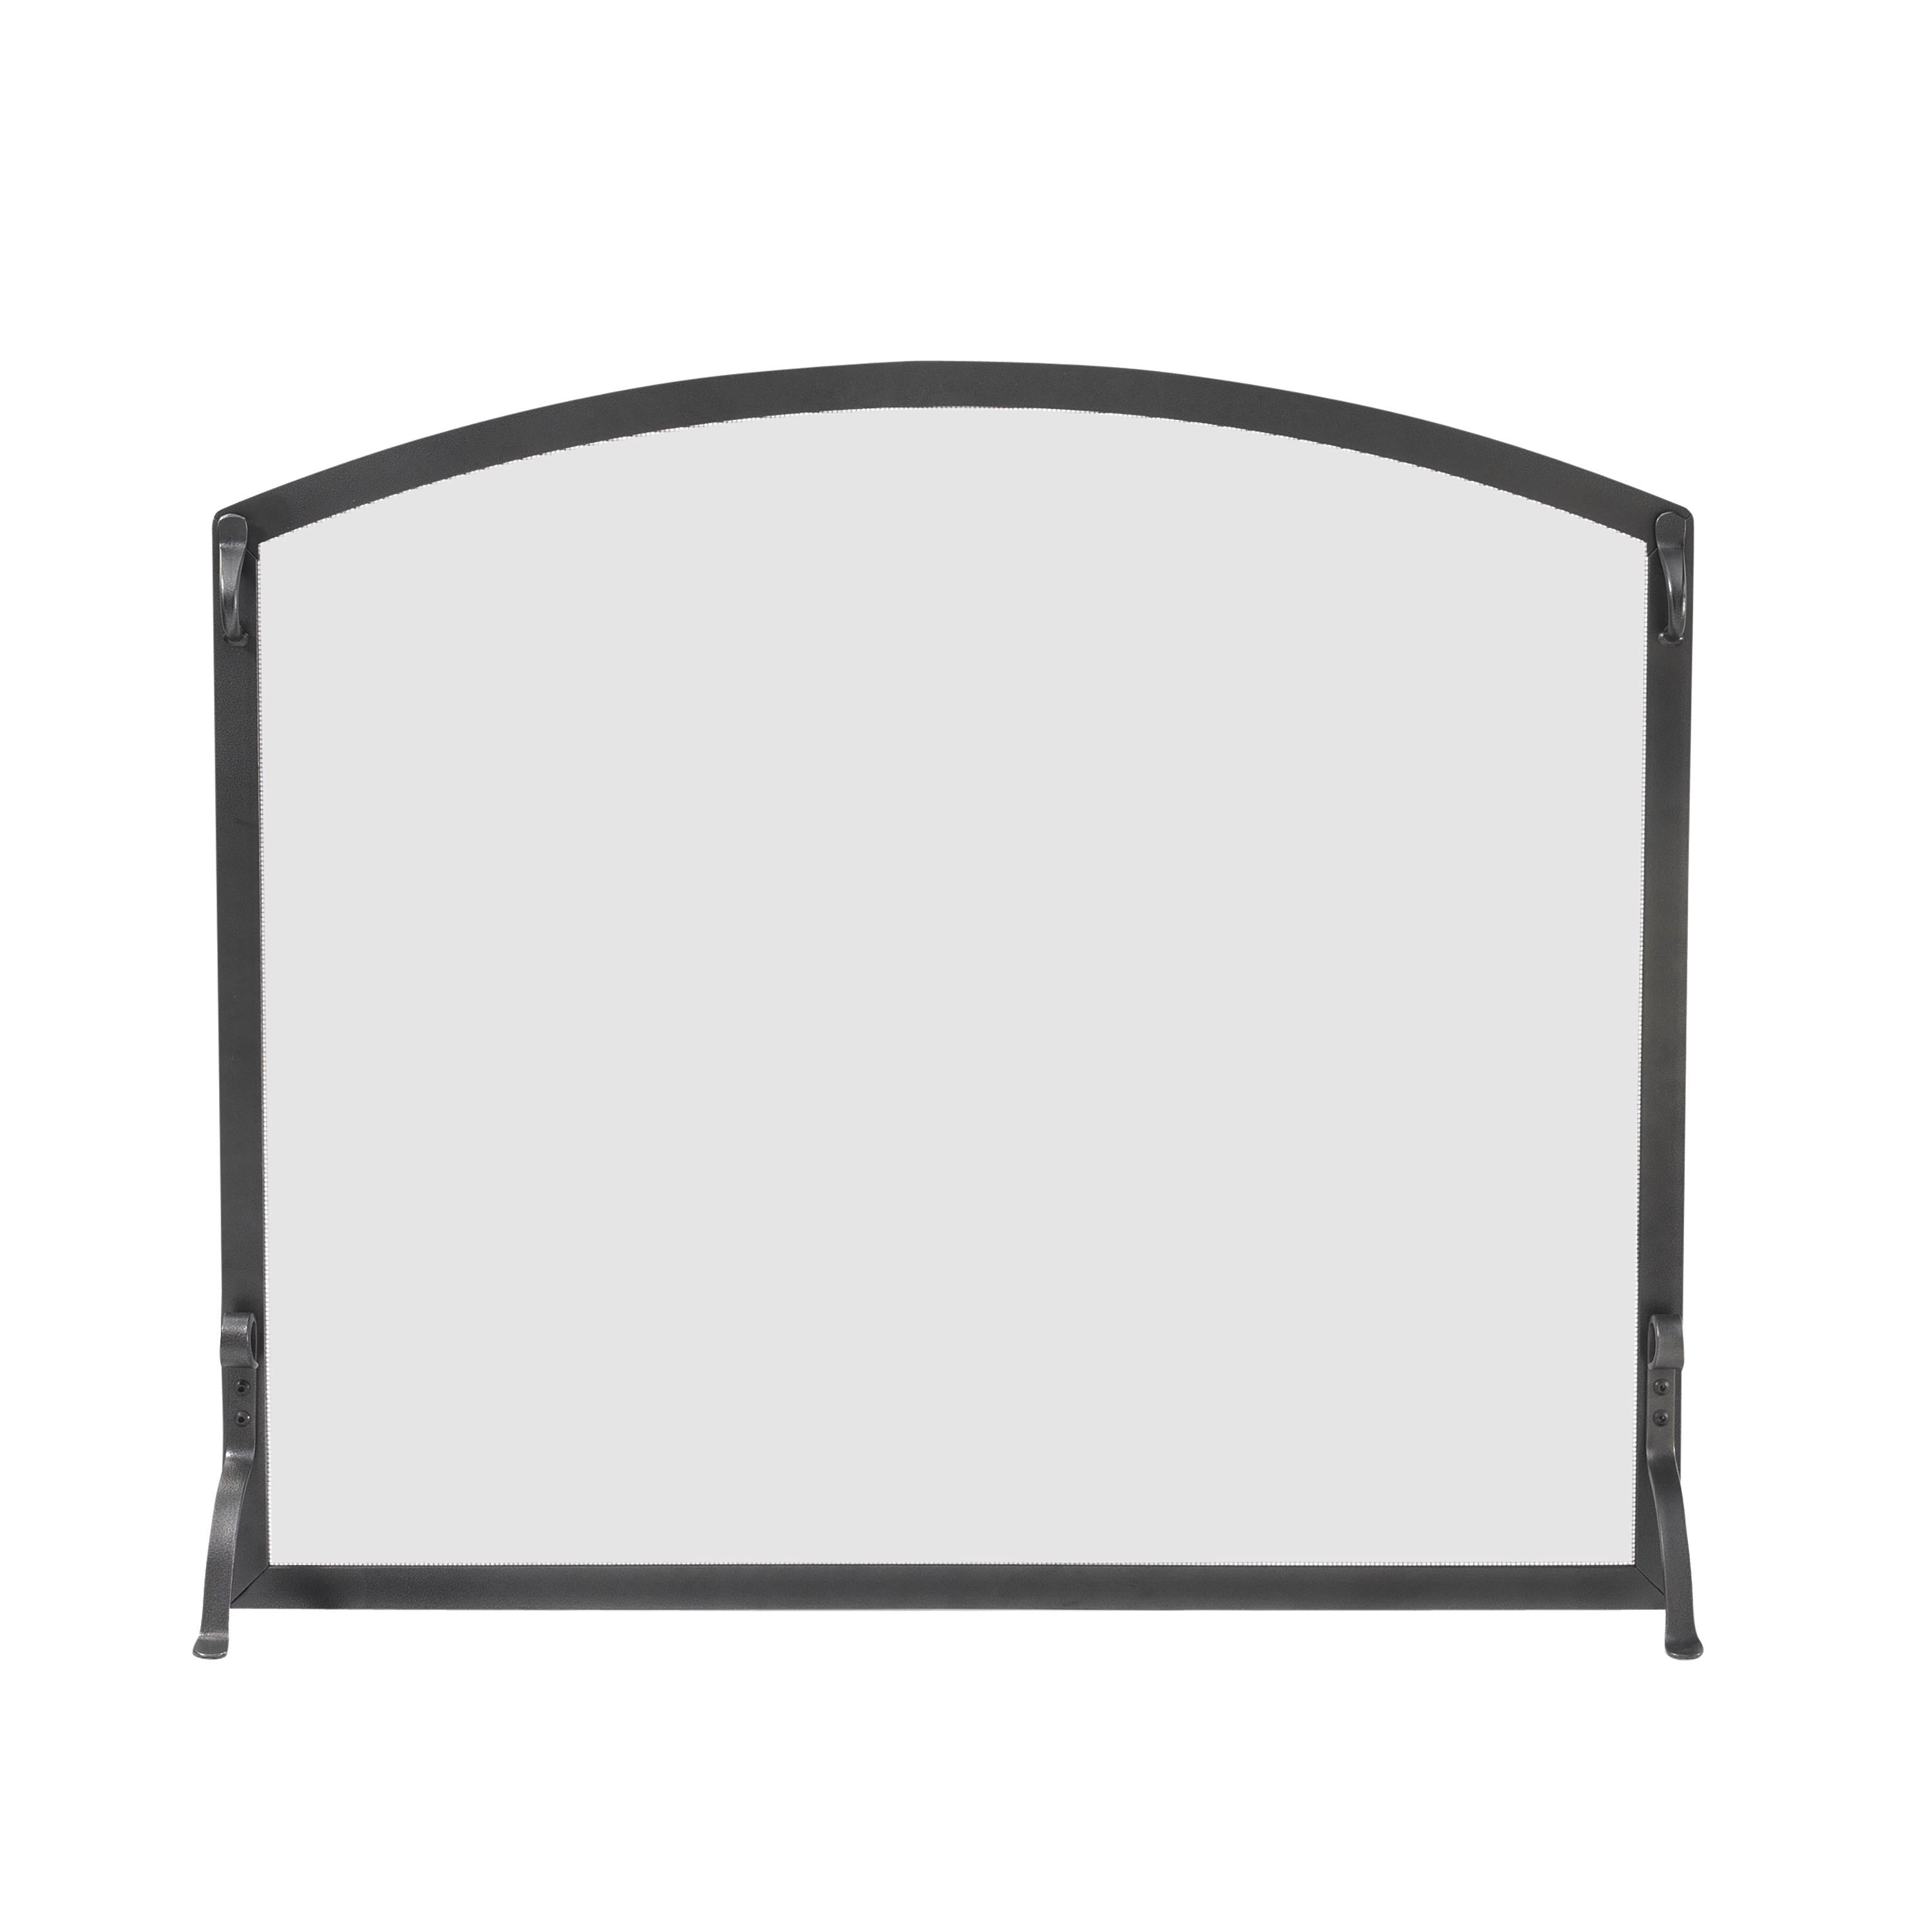 Medium Custom Flat Guard with Arched Top - 1,351 to 2,300 sq. inches